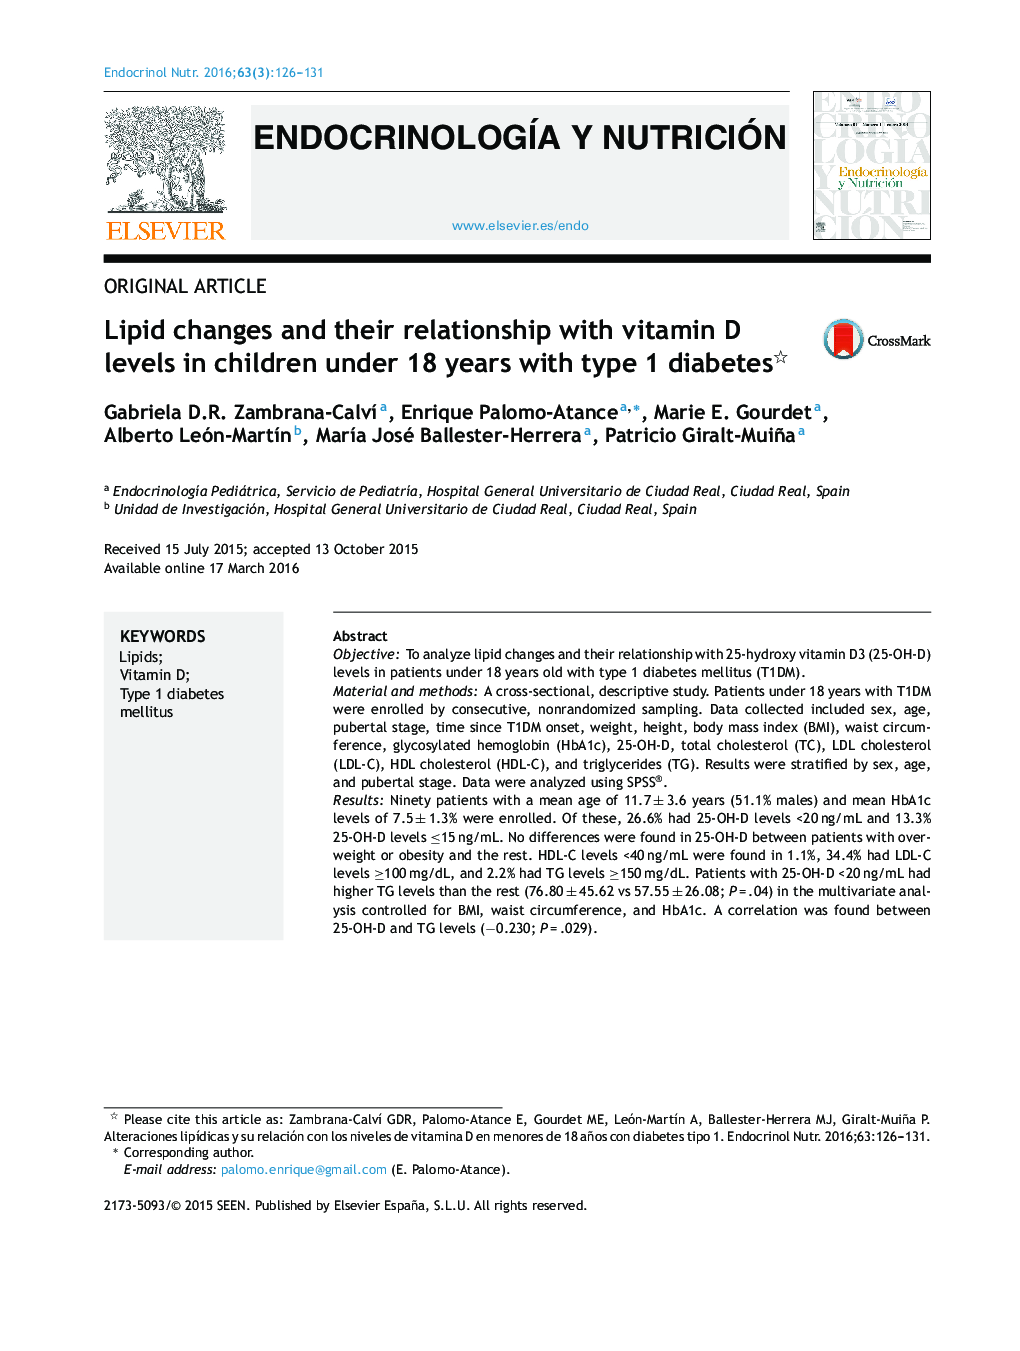 Lipid changes and their relationship with vitamin D levels in children under 18 years with type 1 diabetes 